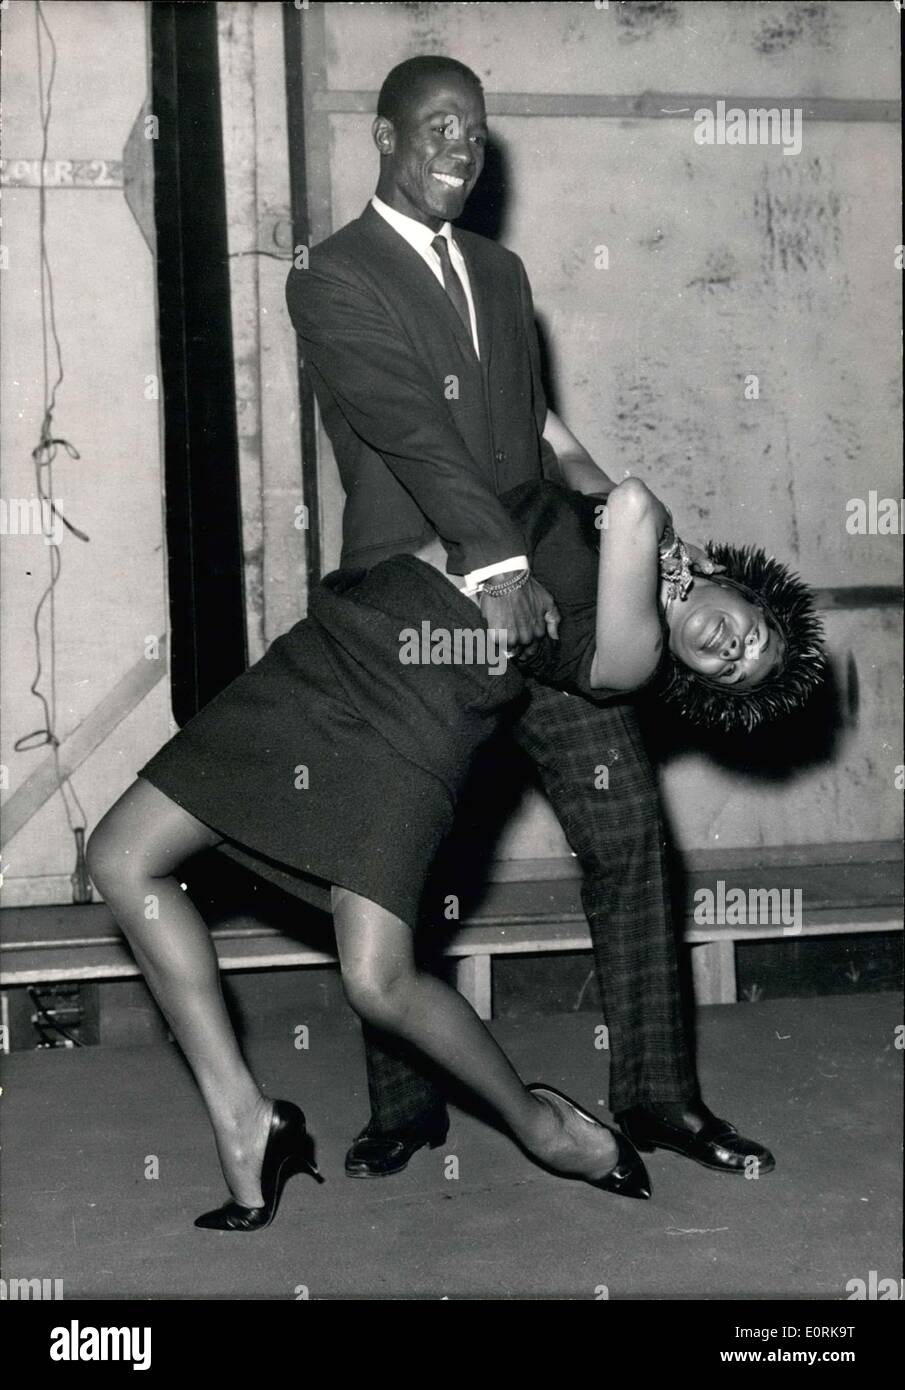 Nov. 03, 1959 - After a 10 year absence, the famous international artist Katherine Dunham arrived in Paris where she will present her ballet company at Sarah-Bernhardt Theater. Katherine Dunham and her partner, Vanoye Aikens, are pictured dancing. Stock Photo